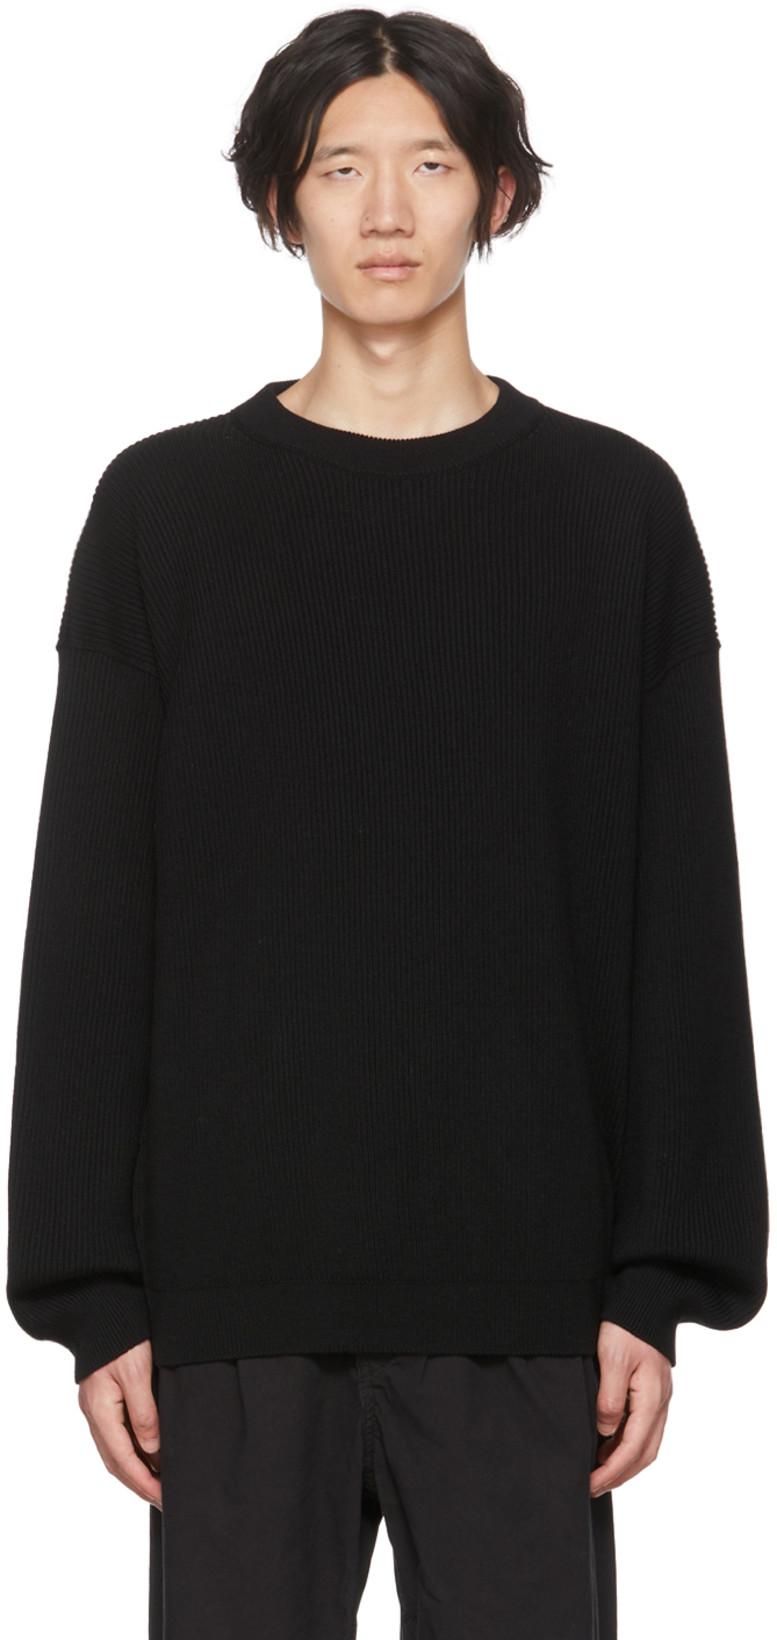 Black EM1-1 Sweater by APPLIED ART FORMS